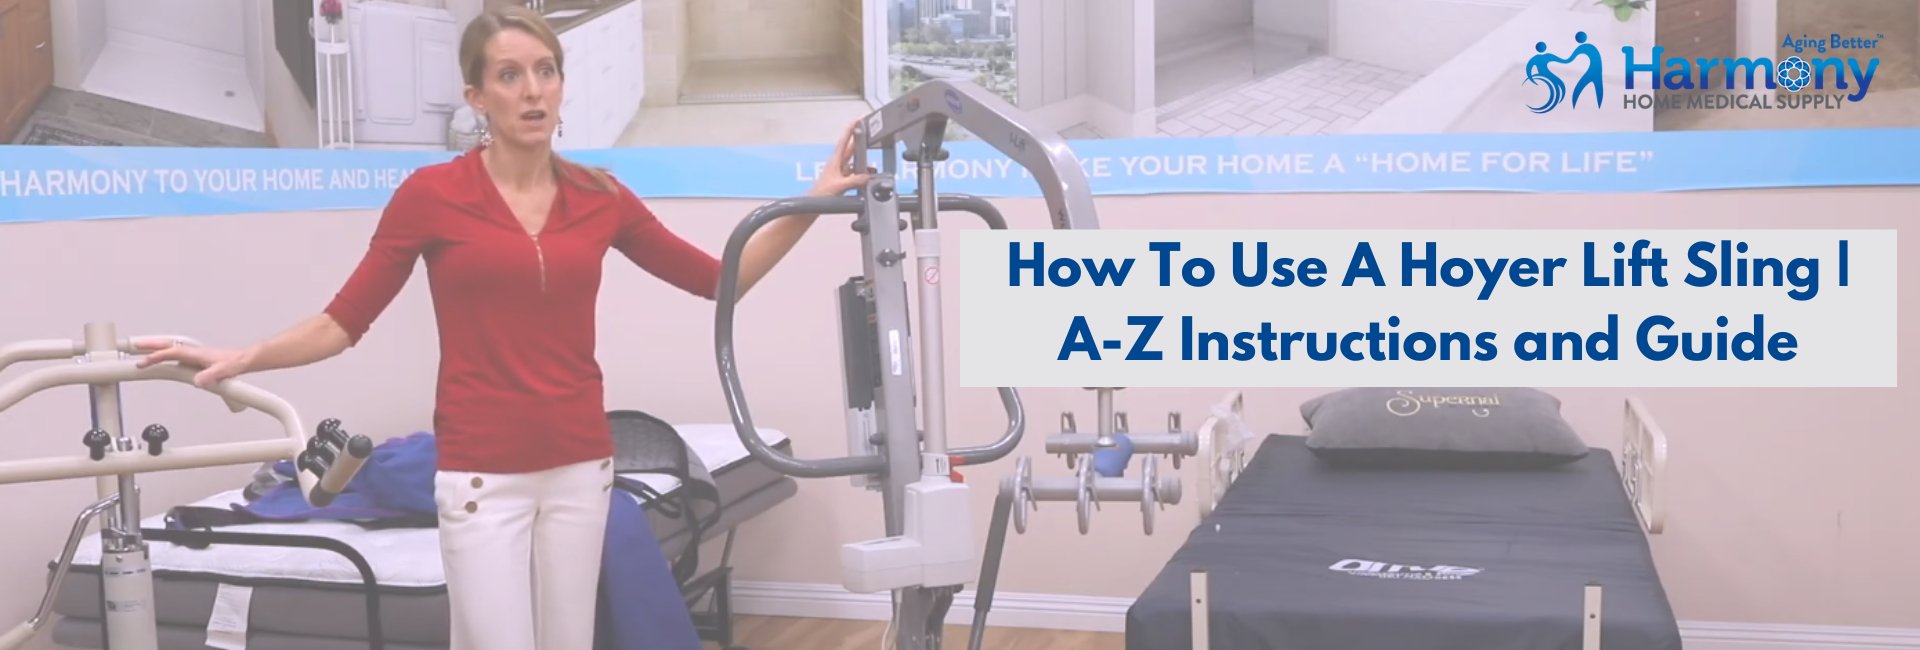 How To Use A Hoyer Lift Sling | A-Z Instructions and Guide